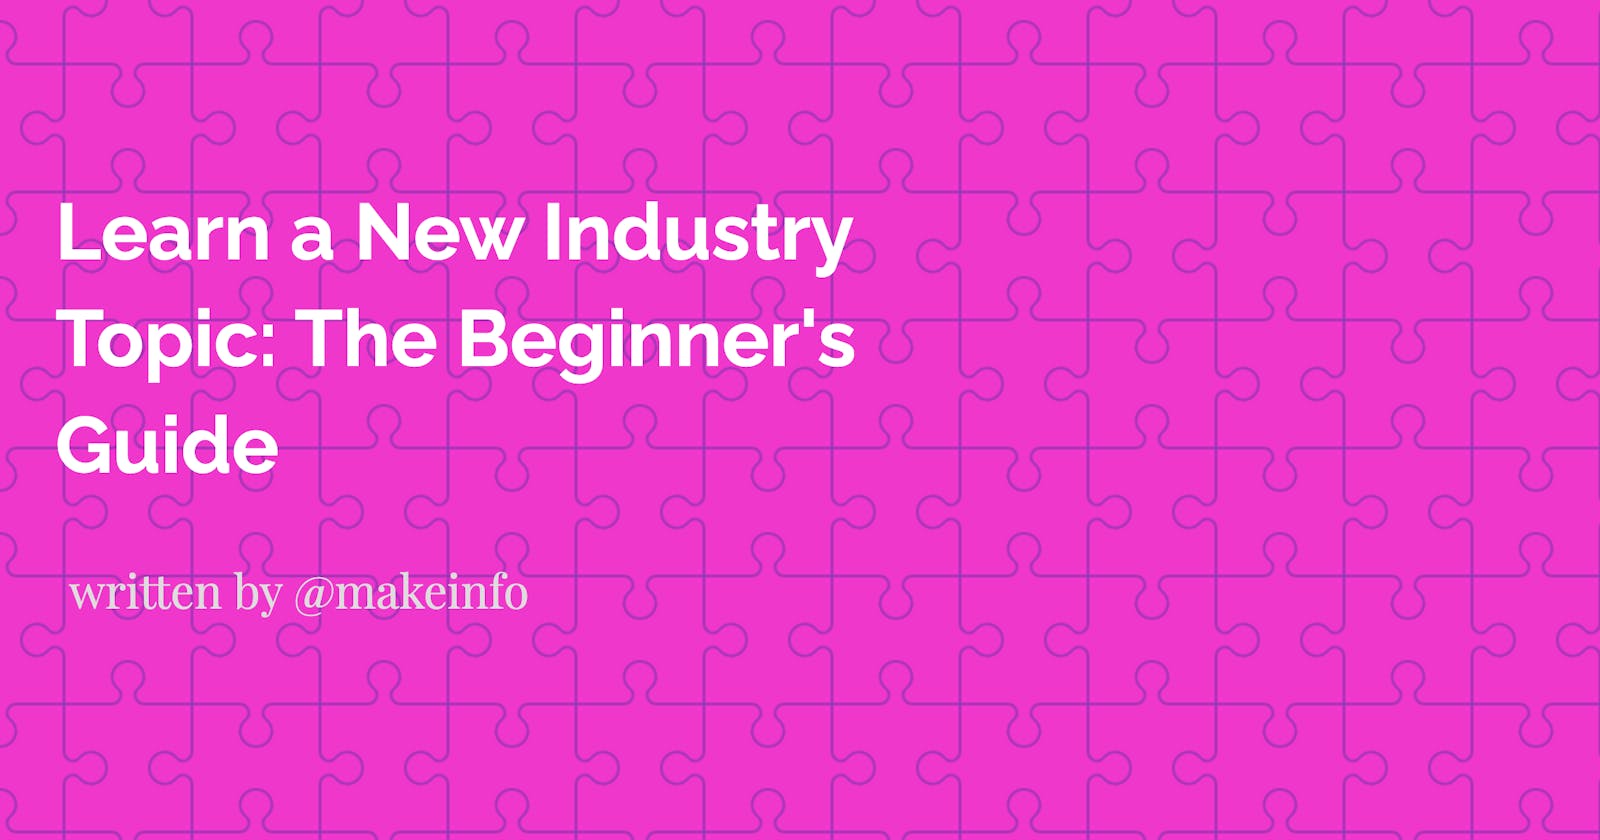 Learn a New Industry Topic: The Beginner's Guide